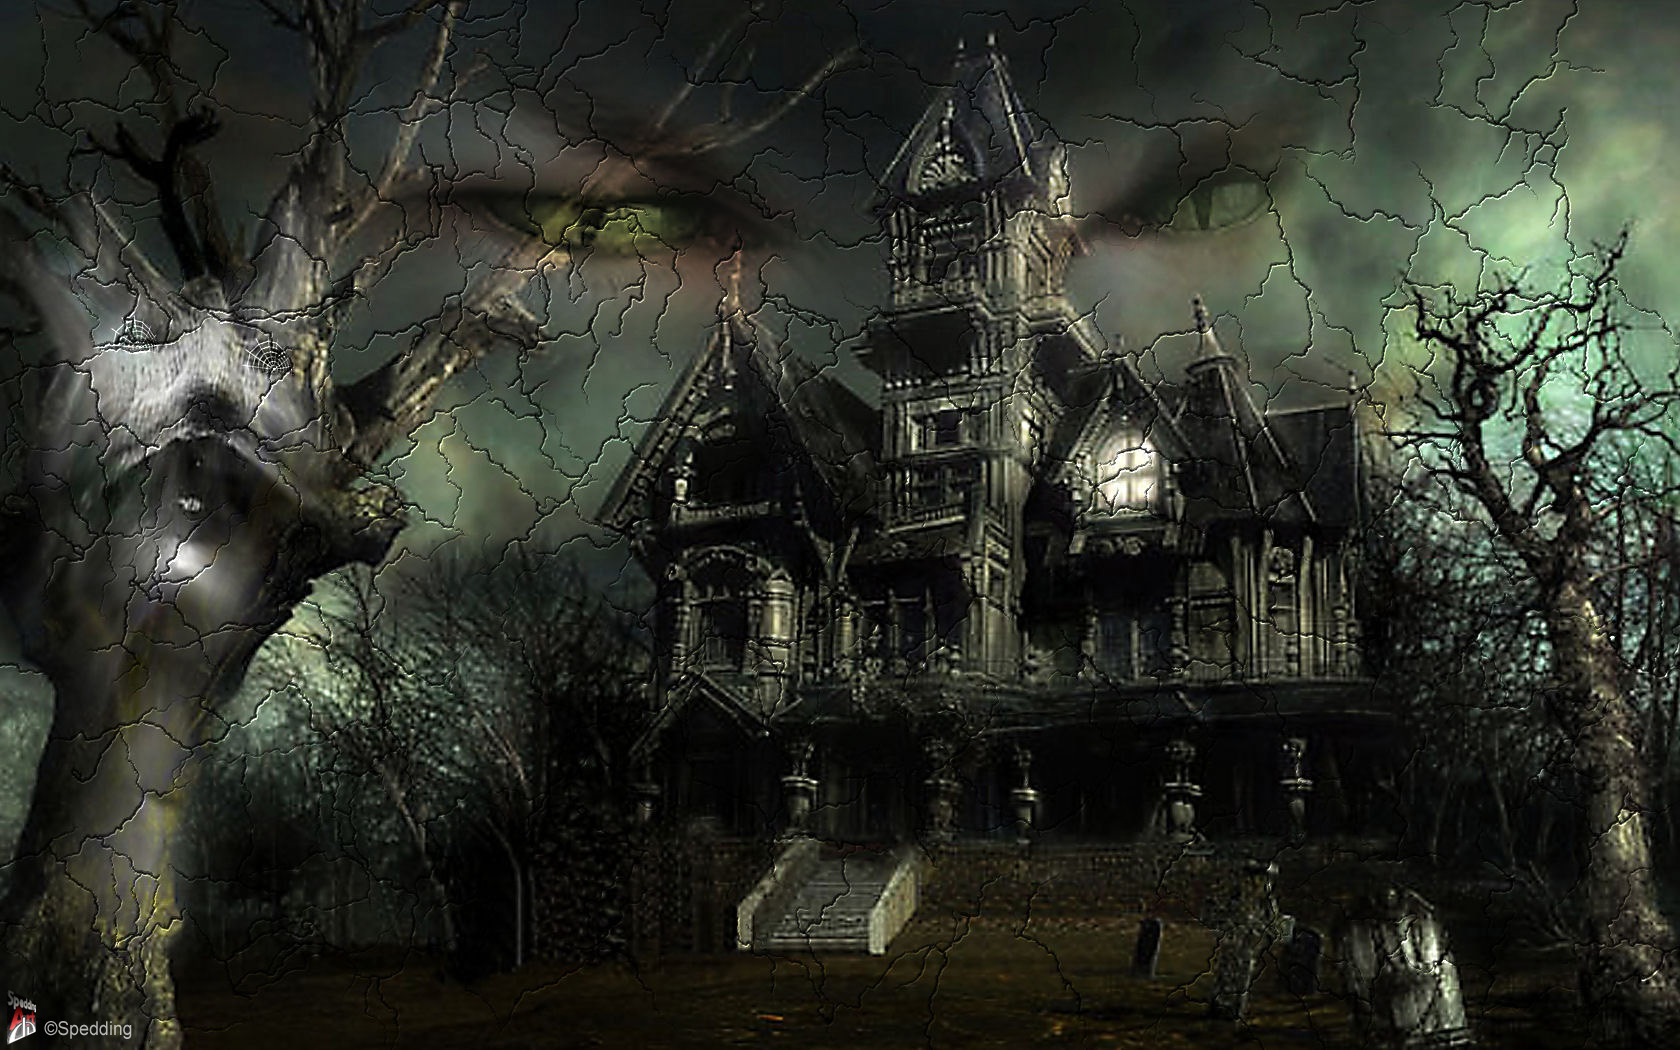 Creepy Halloween Wallpaper Images amp Pictures   Becuo 1680x1050